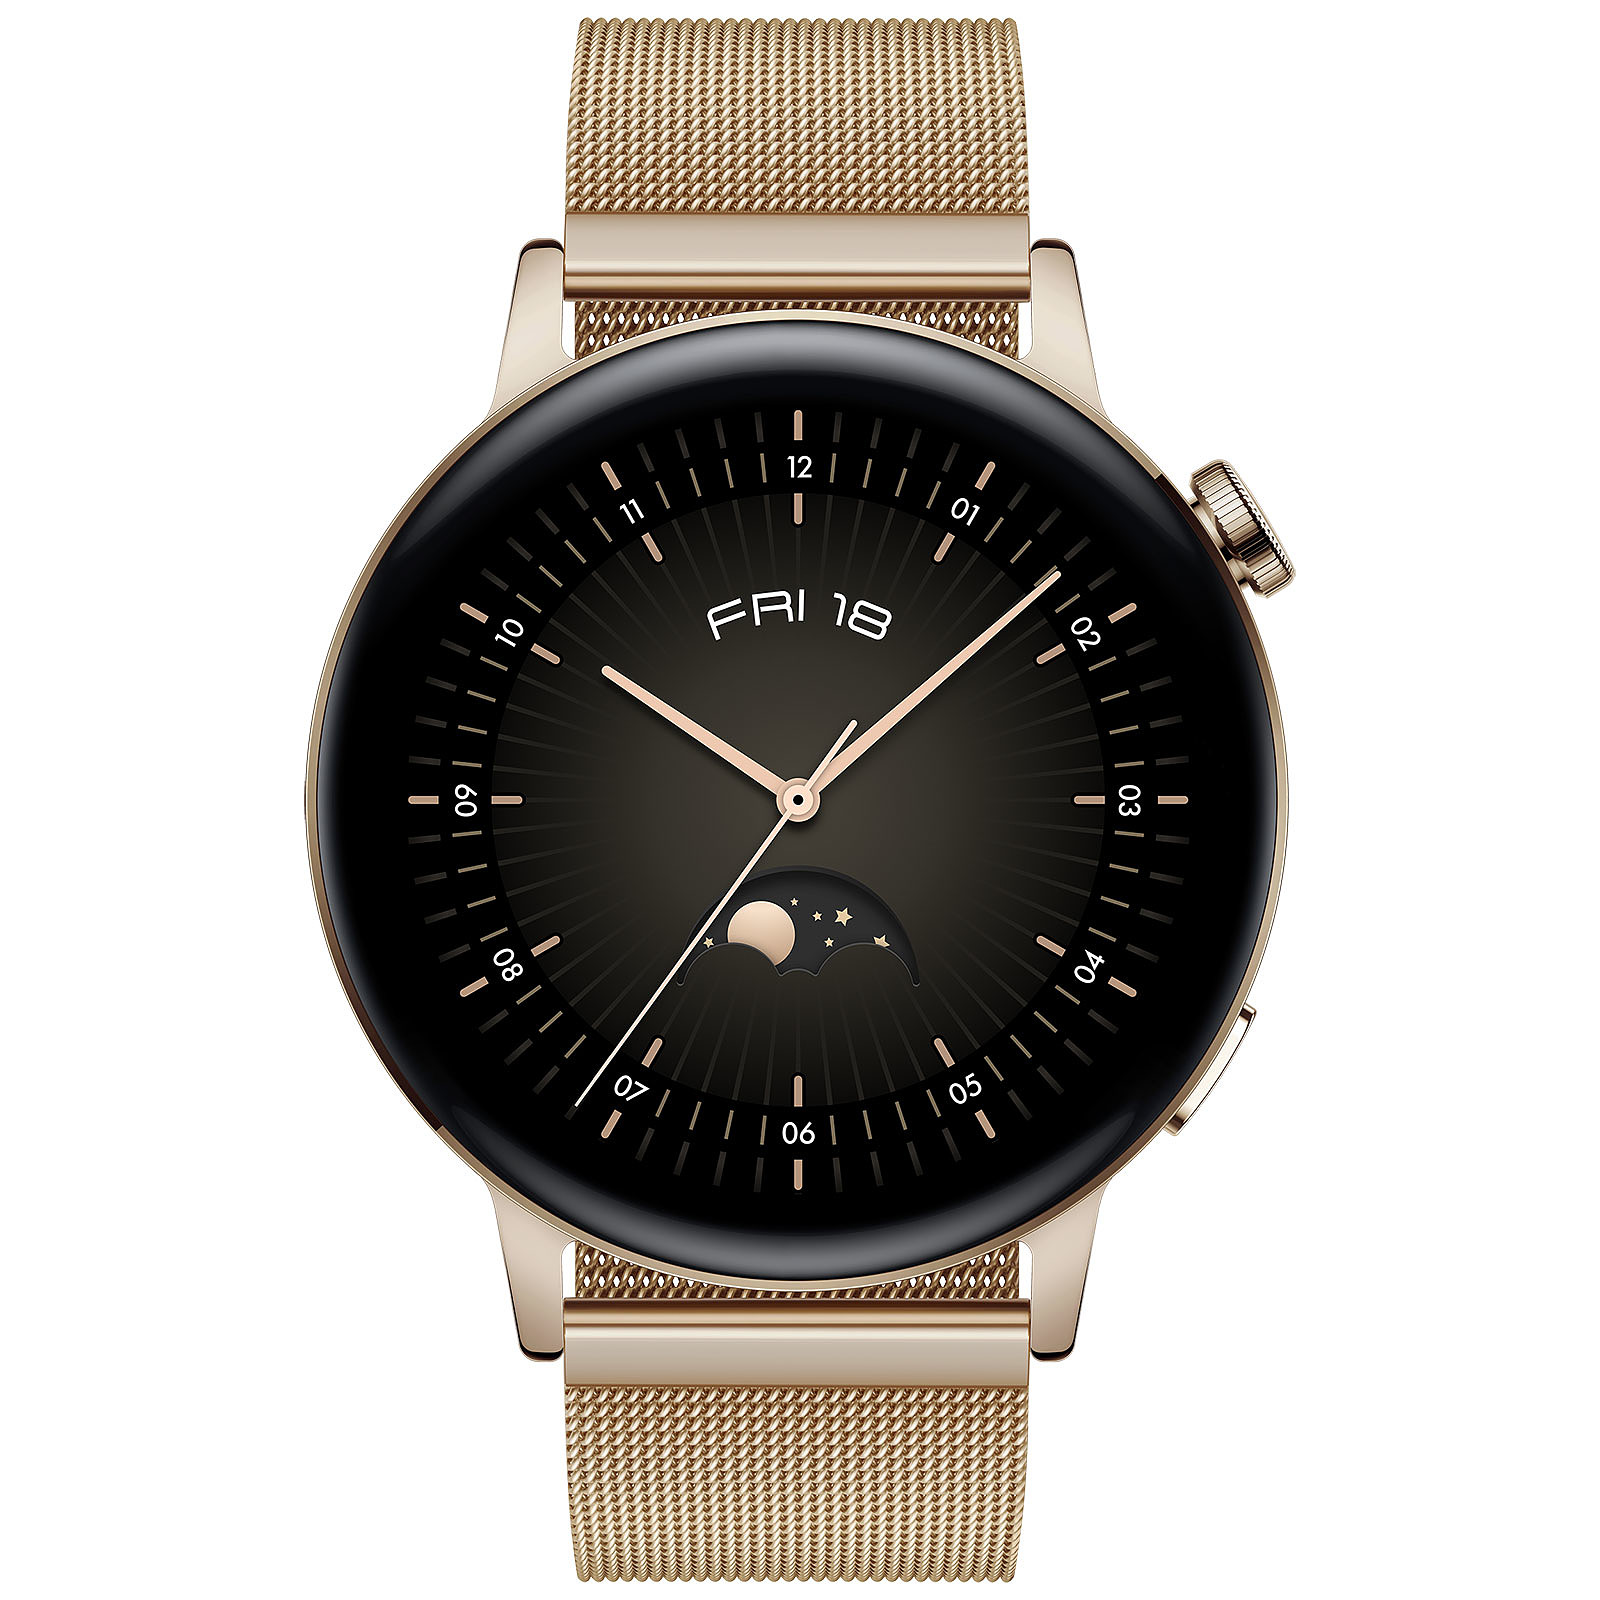 Huawei Watch Gt 3 42mm Gold Mall Acero